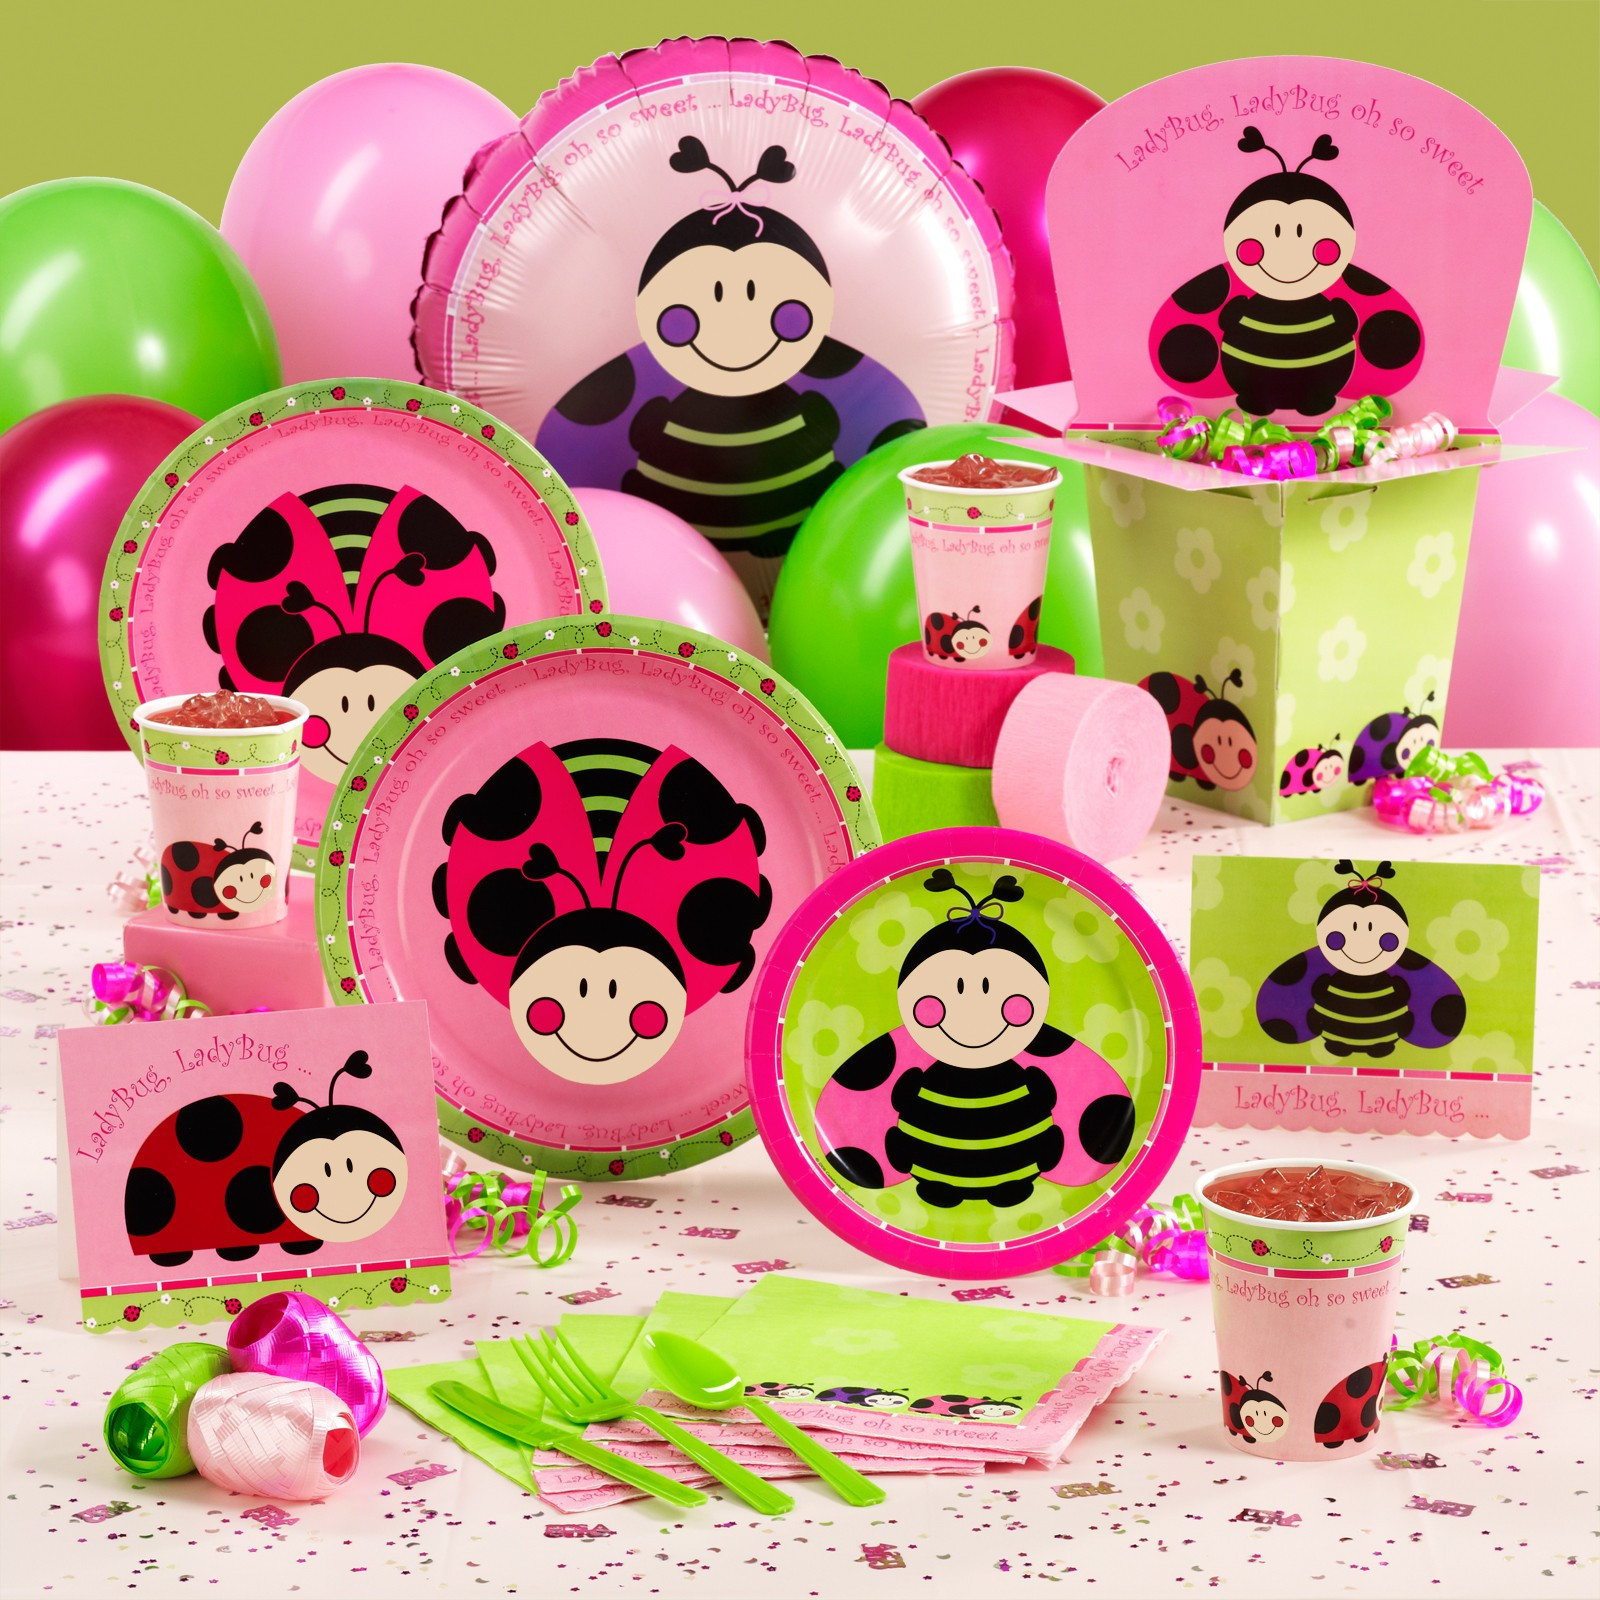 Party City Baby Shower Ideas
 Sandy Party Decorations